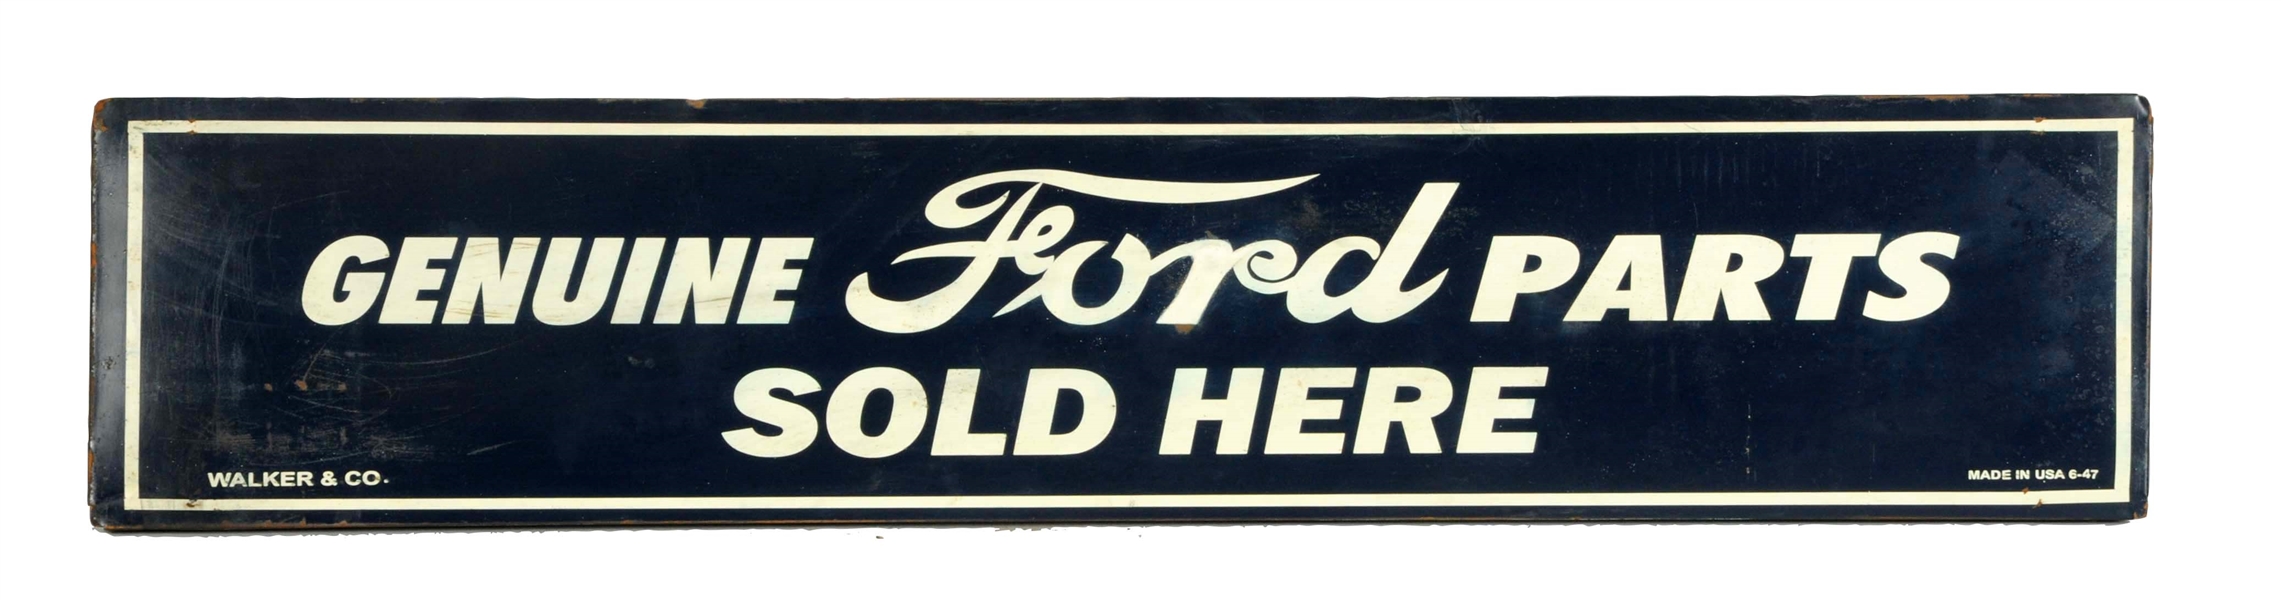 GENUINE FORD PARTS "SOLD HERE" METAL SIGN.